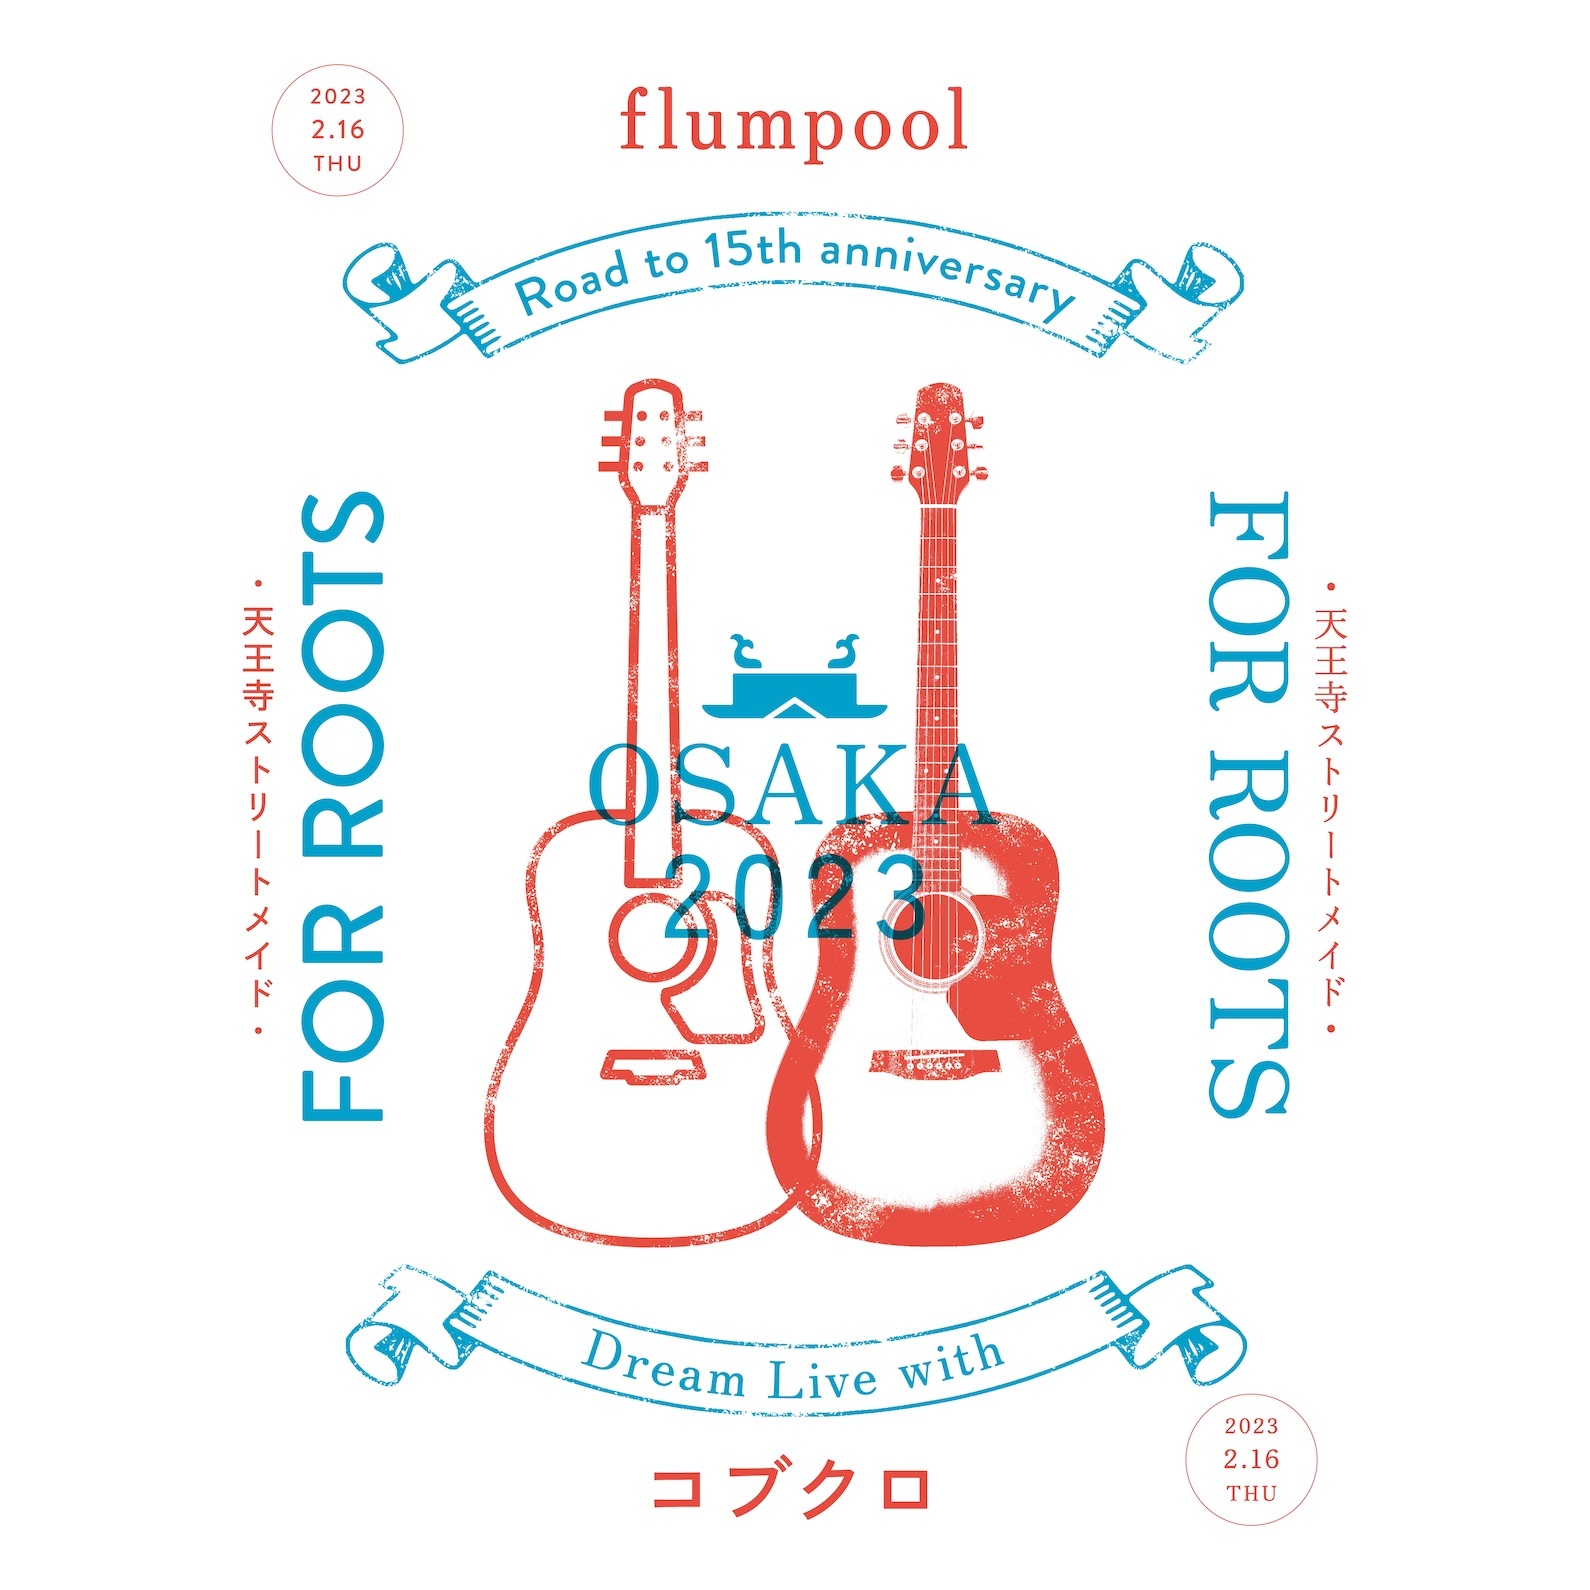 『flumpool Road to 15th anniversary Dream Live with コブクロ「FOR ROOTS〜天王寺ストリートメイド〜」』